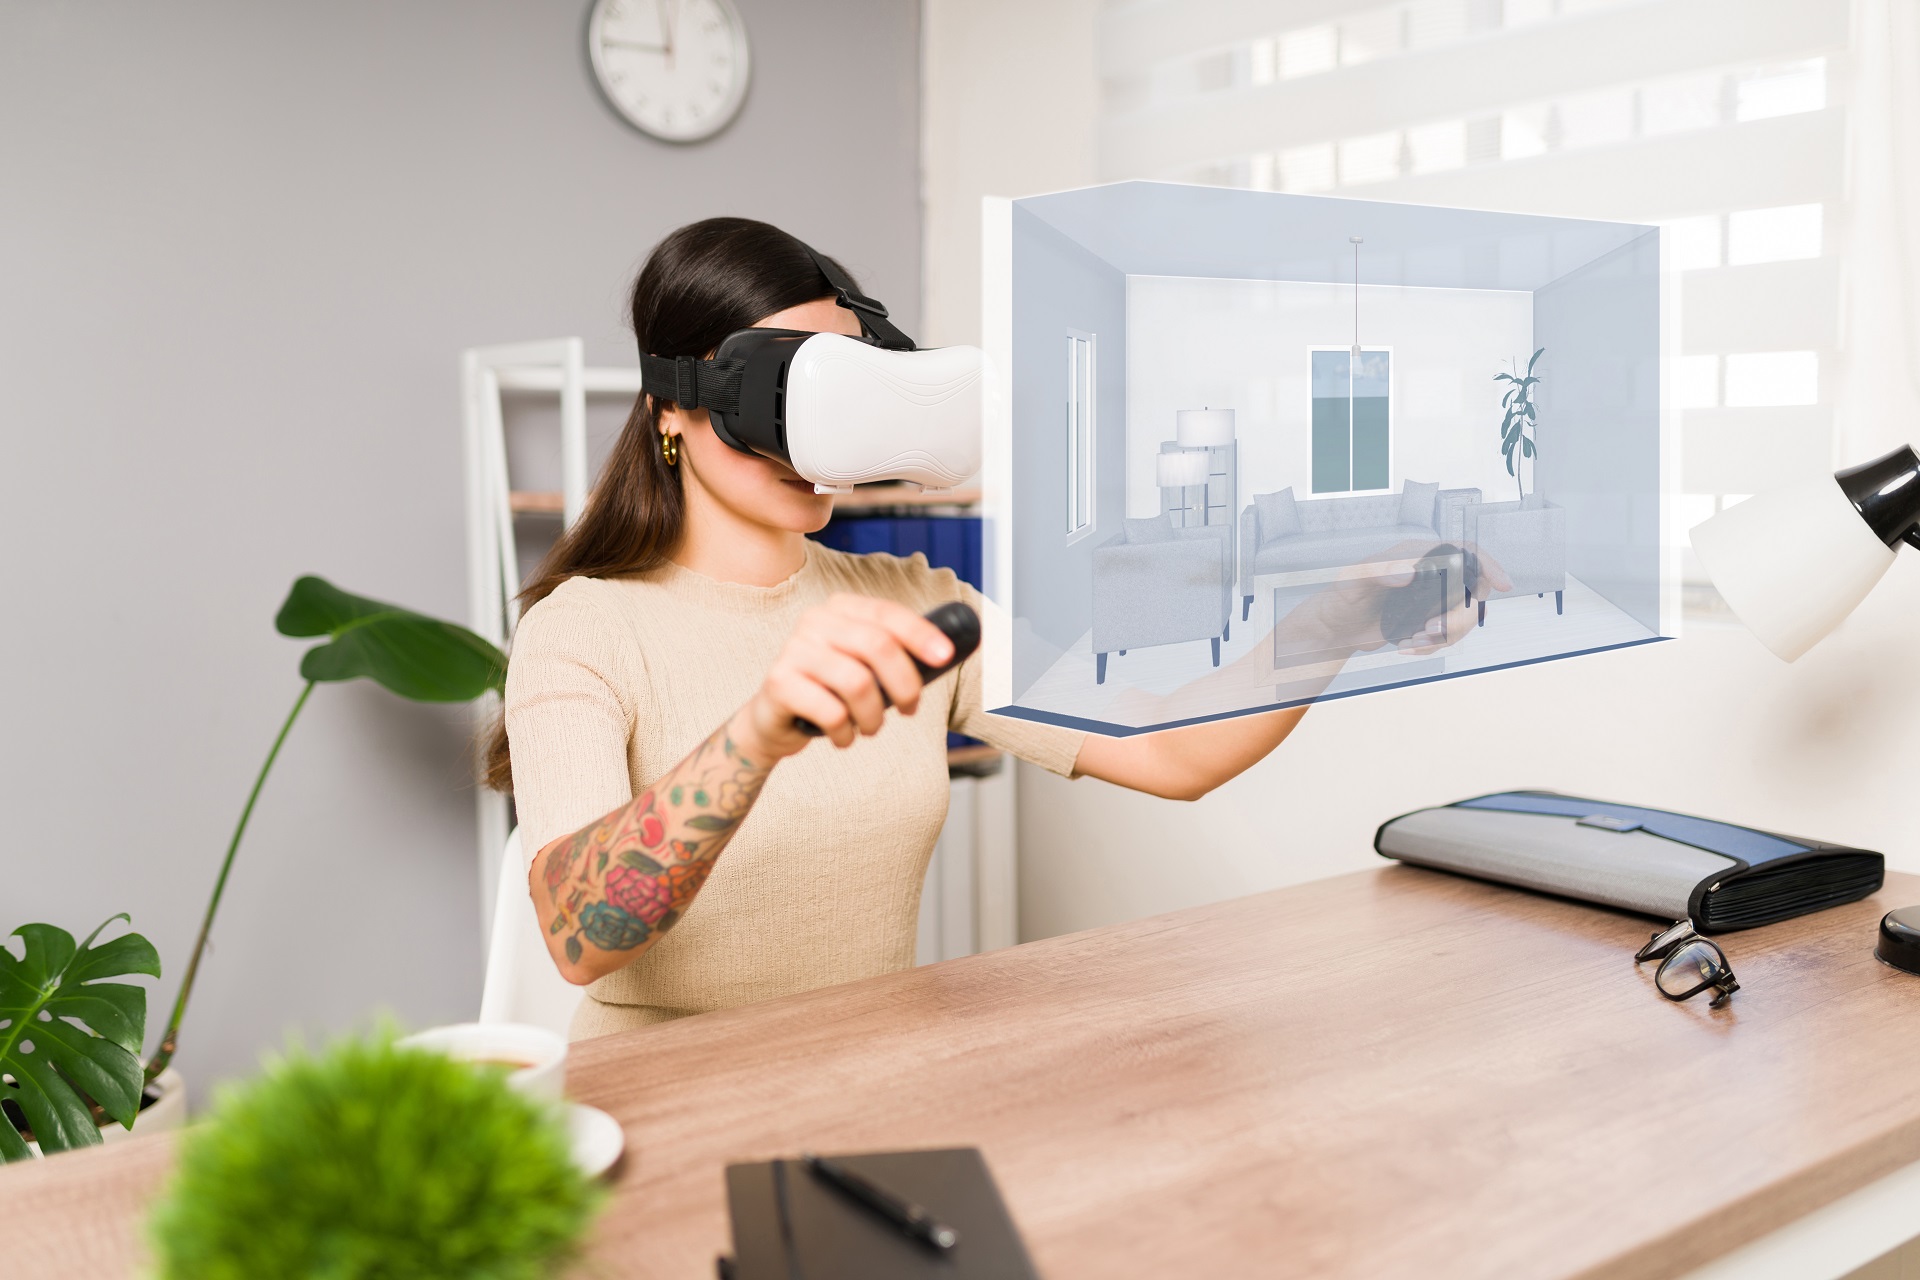 VR for Real Estate: Great Immersion